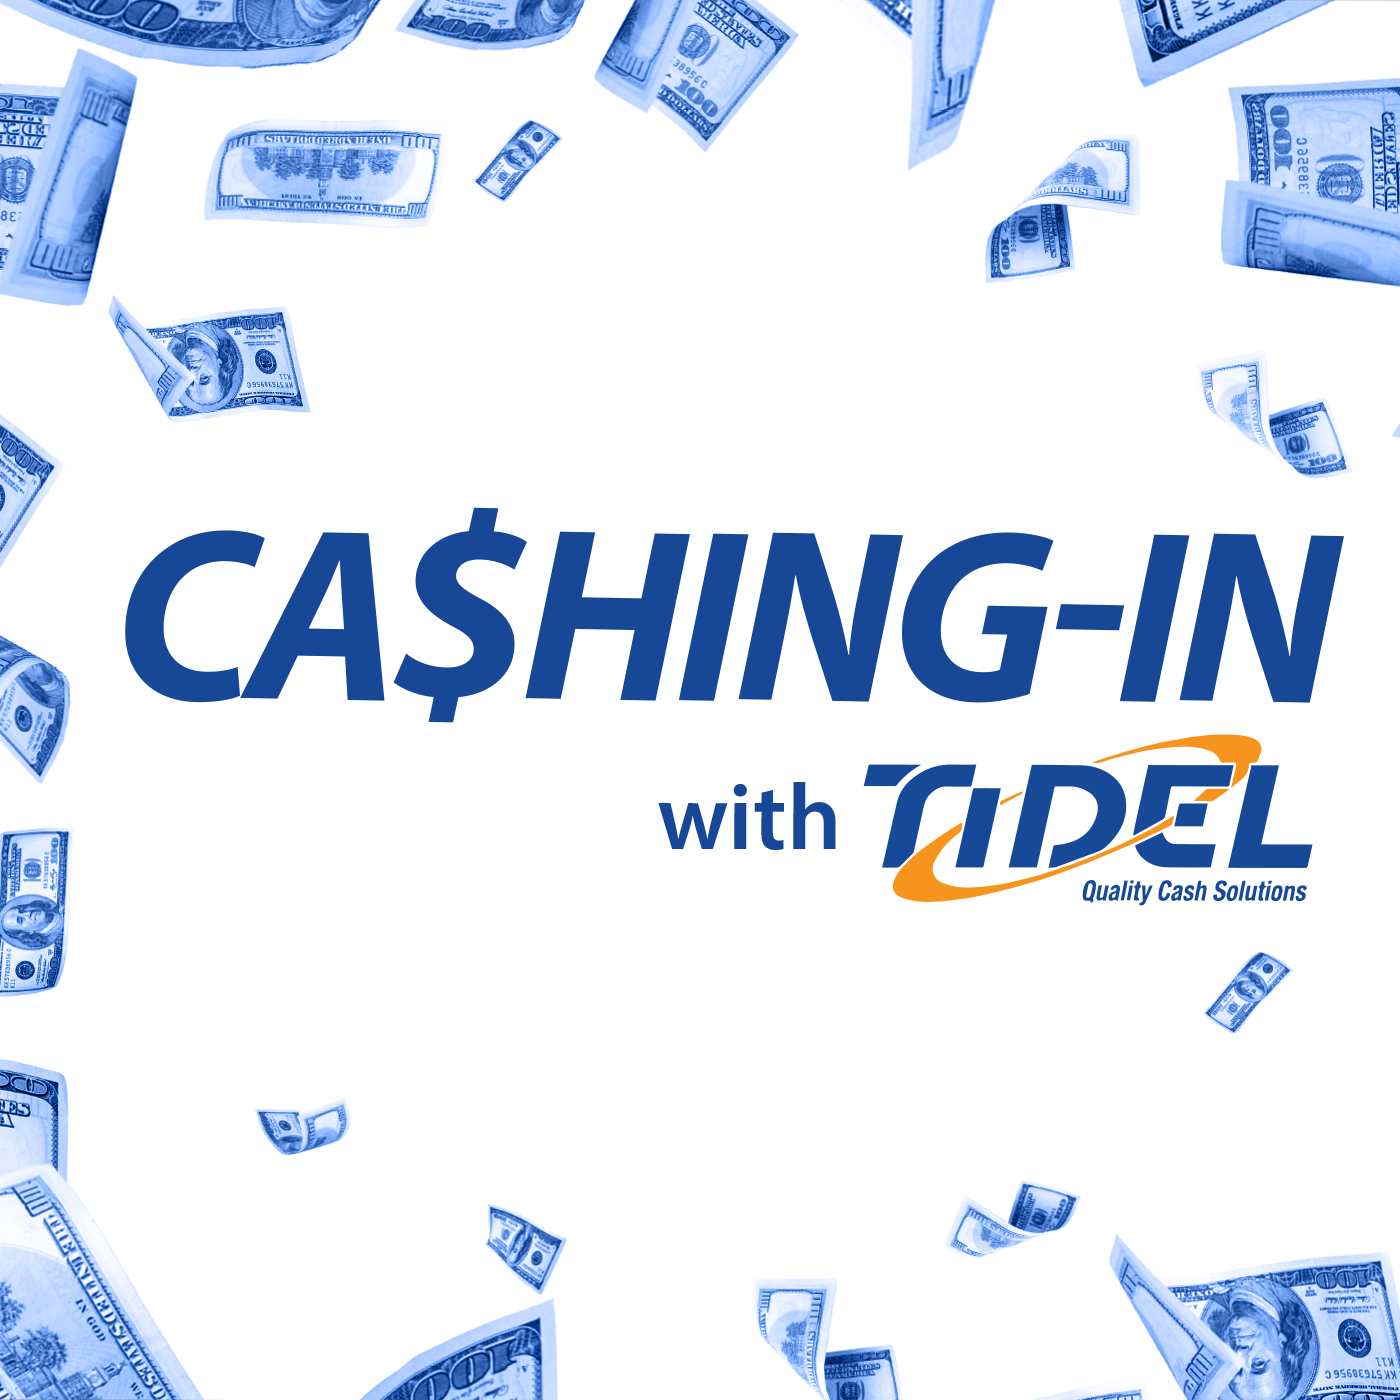 Cashing-In with Tidel